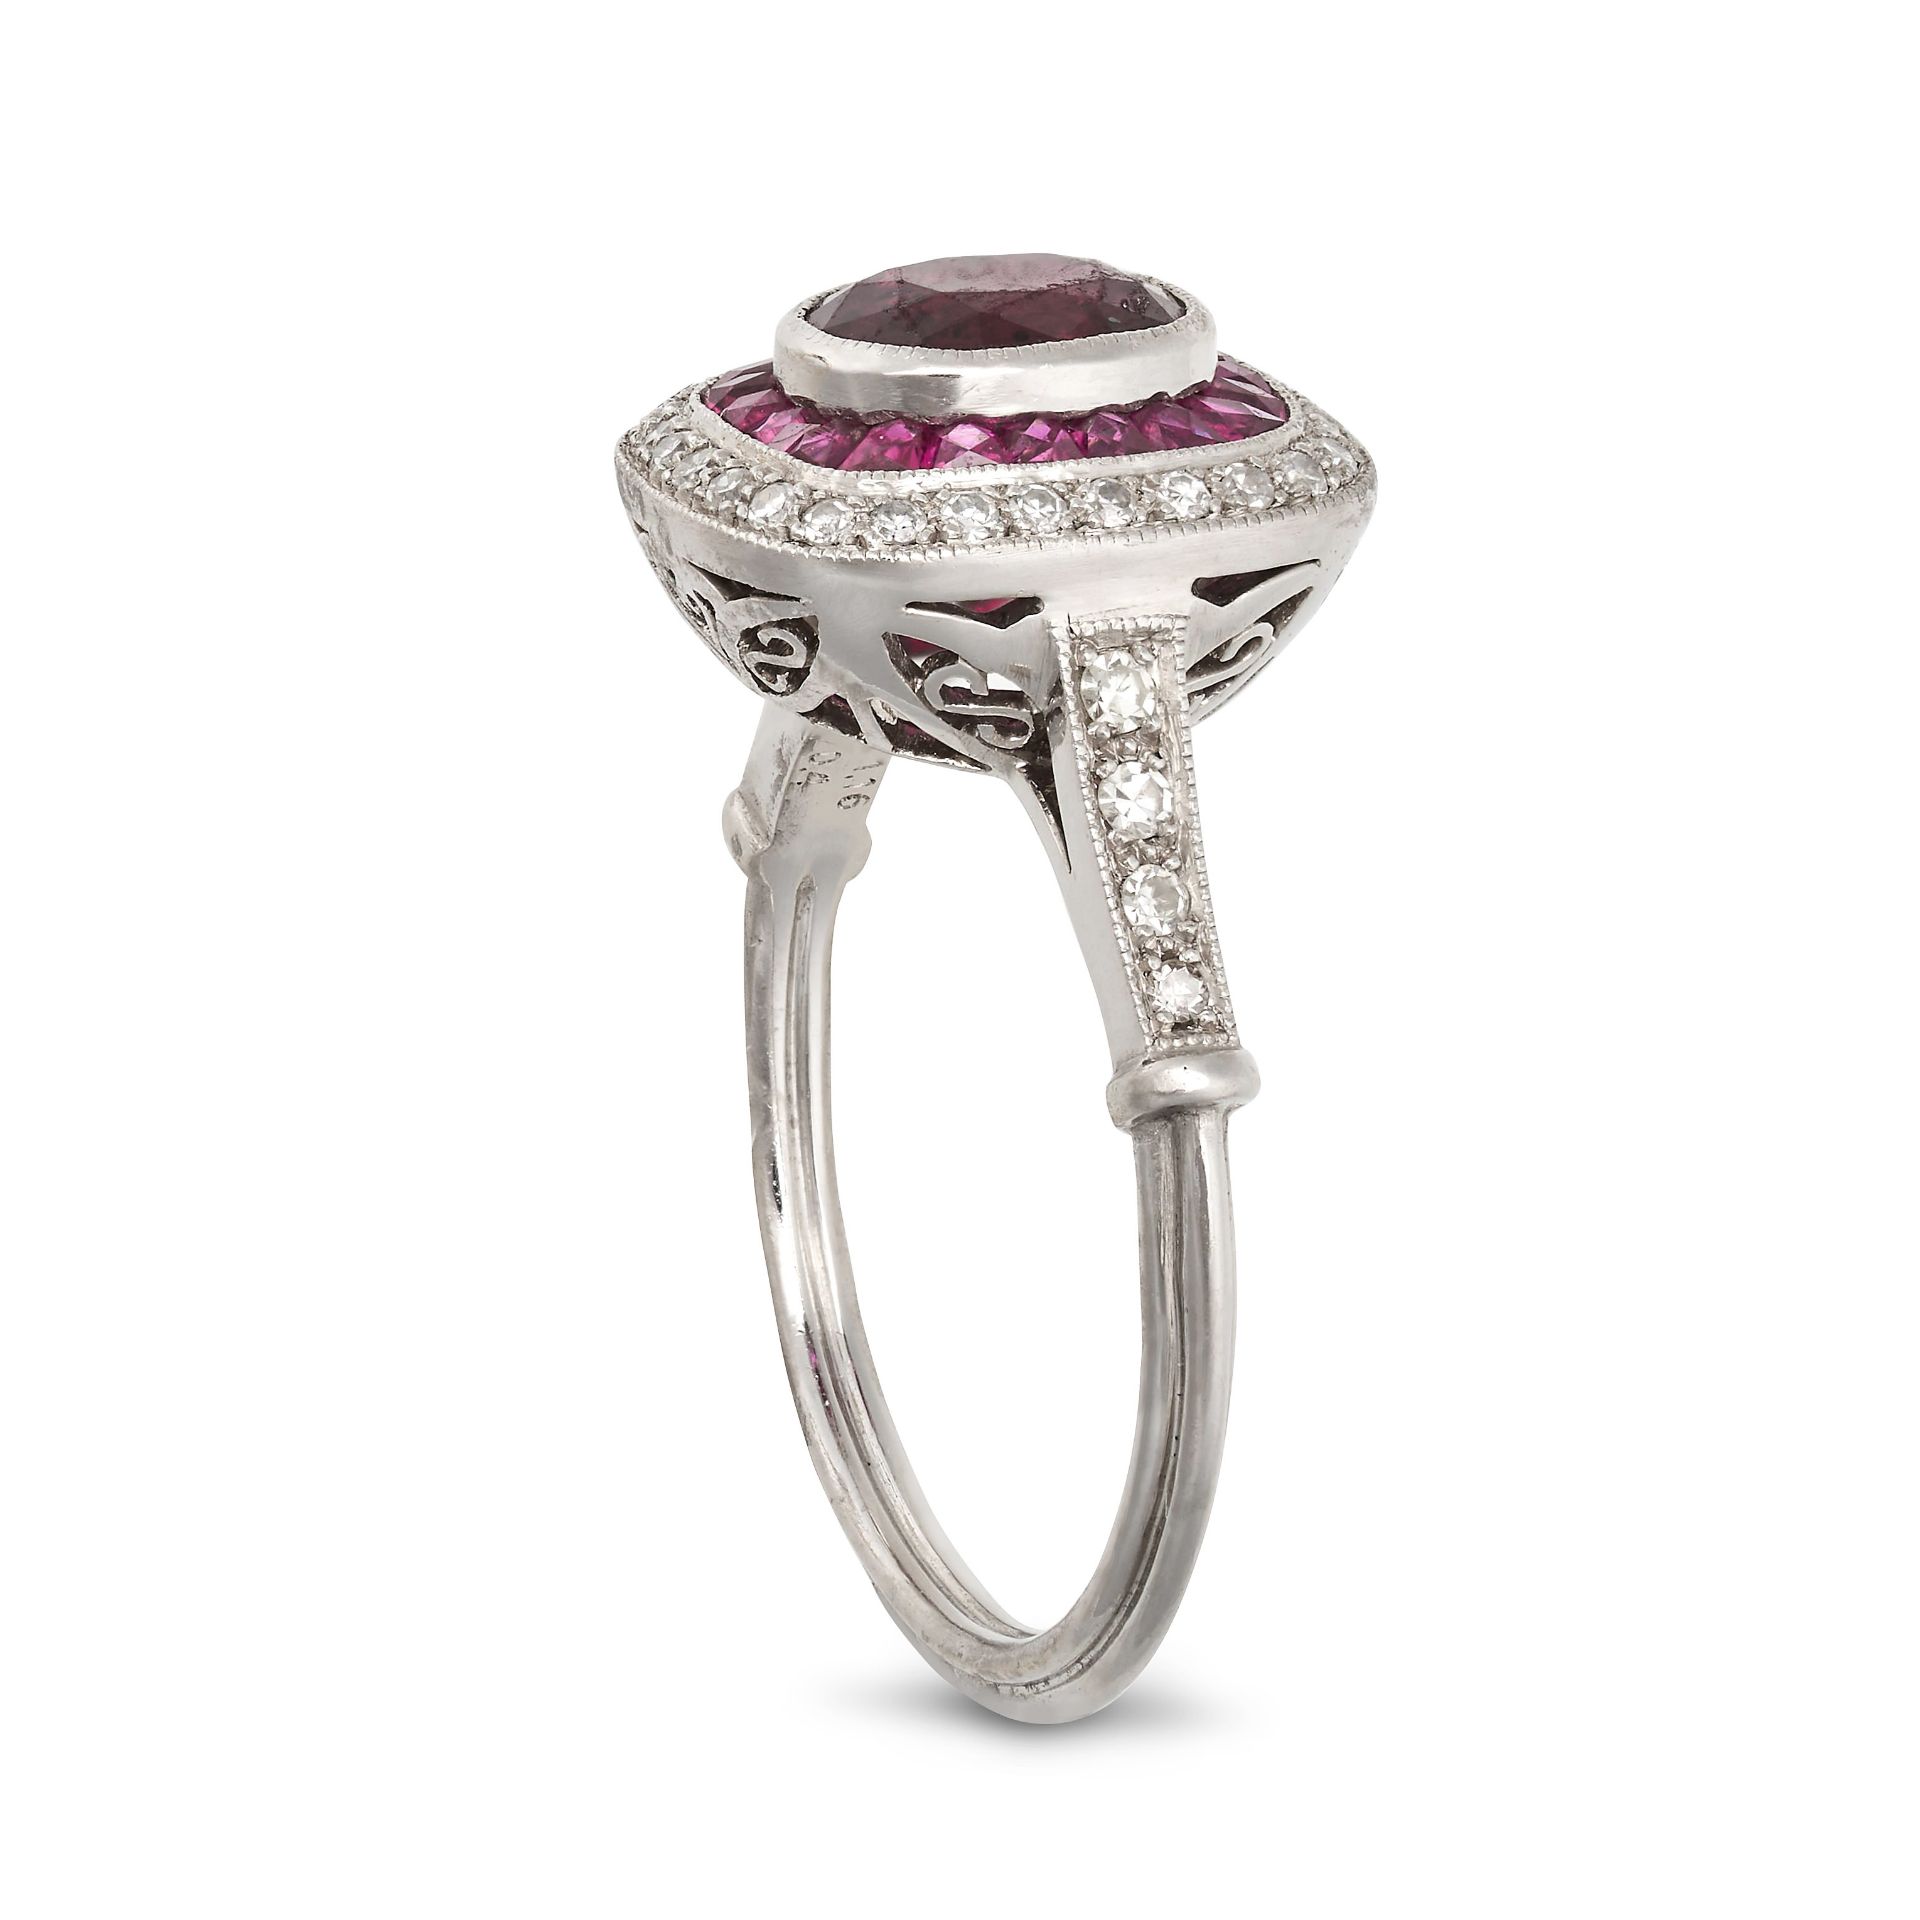 A RUBY AND DIAMOND DRESS RING in platinum, set with an oval cut ruby of 1.16 carats in a border o... - Image 2 of 2